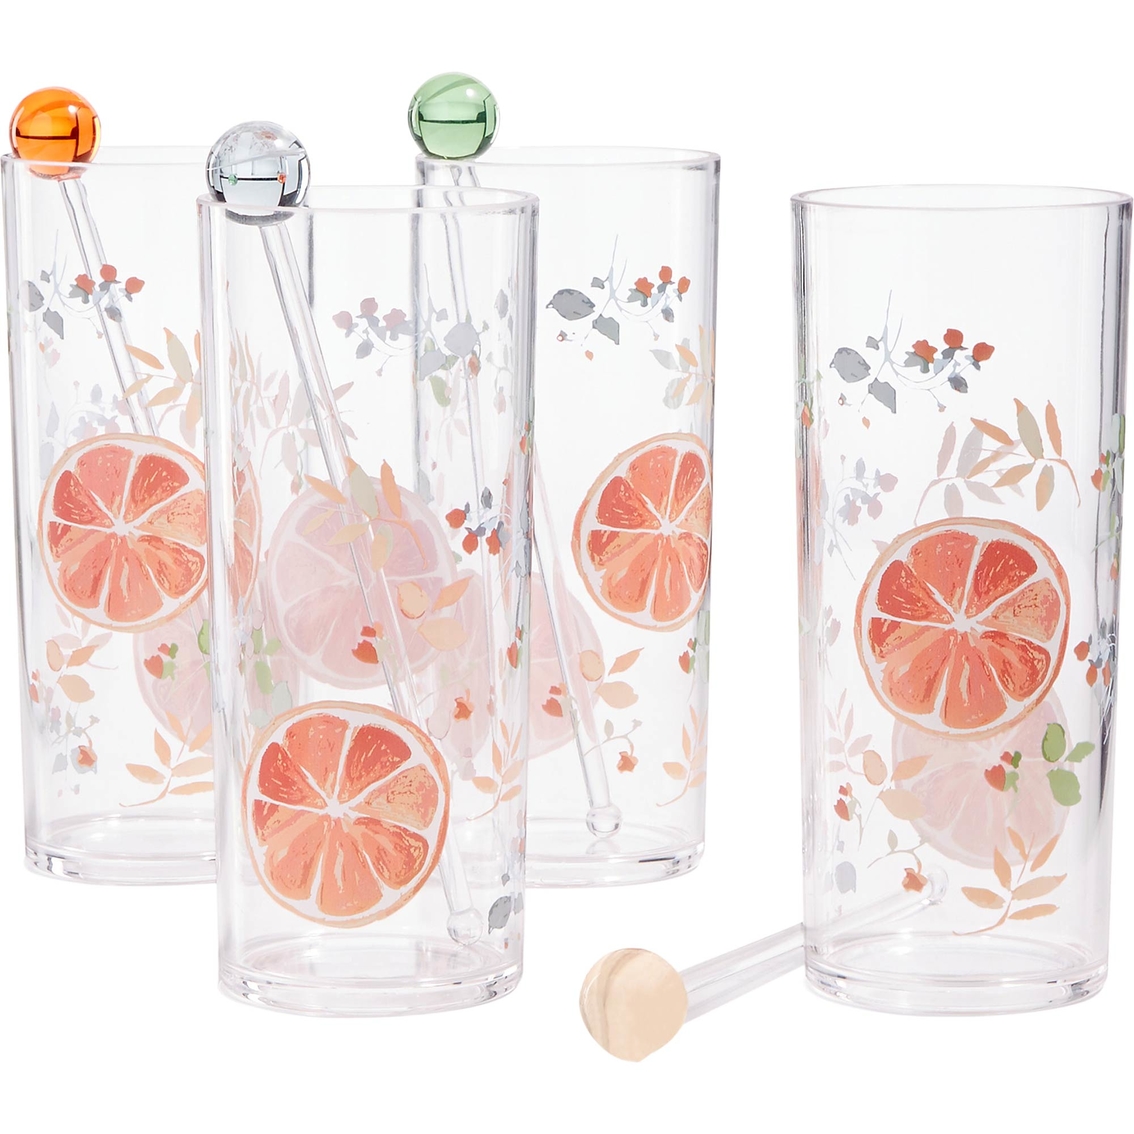 Martha Stewart Collection Citrus Tom Collins Glasses 4 Pk Beer Bar Wine Glasses Household Shop The Exchange,Bird Wings